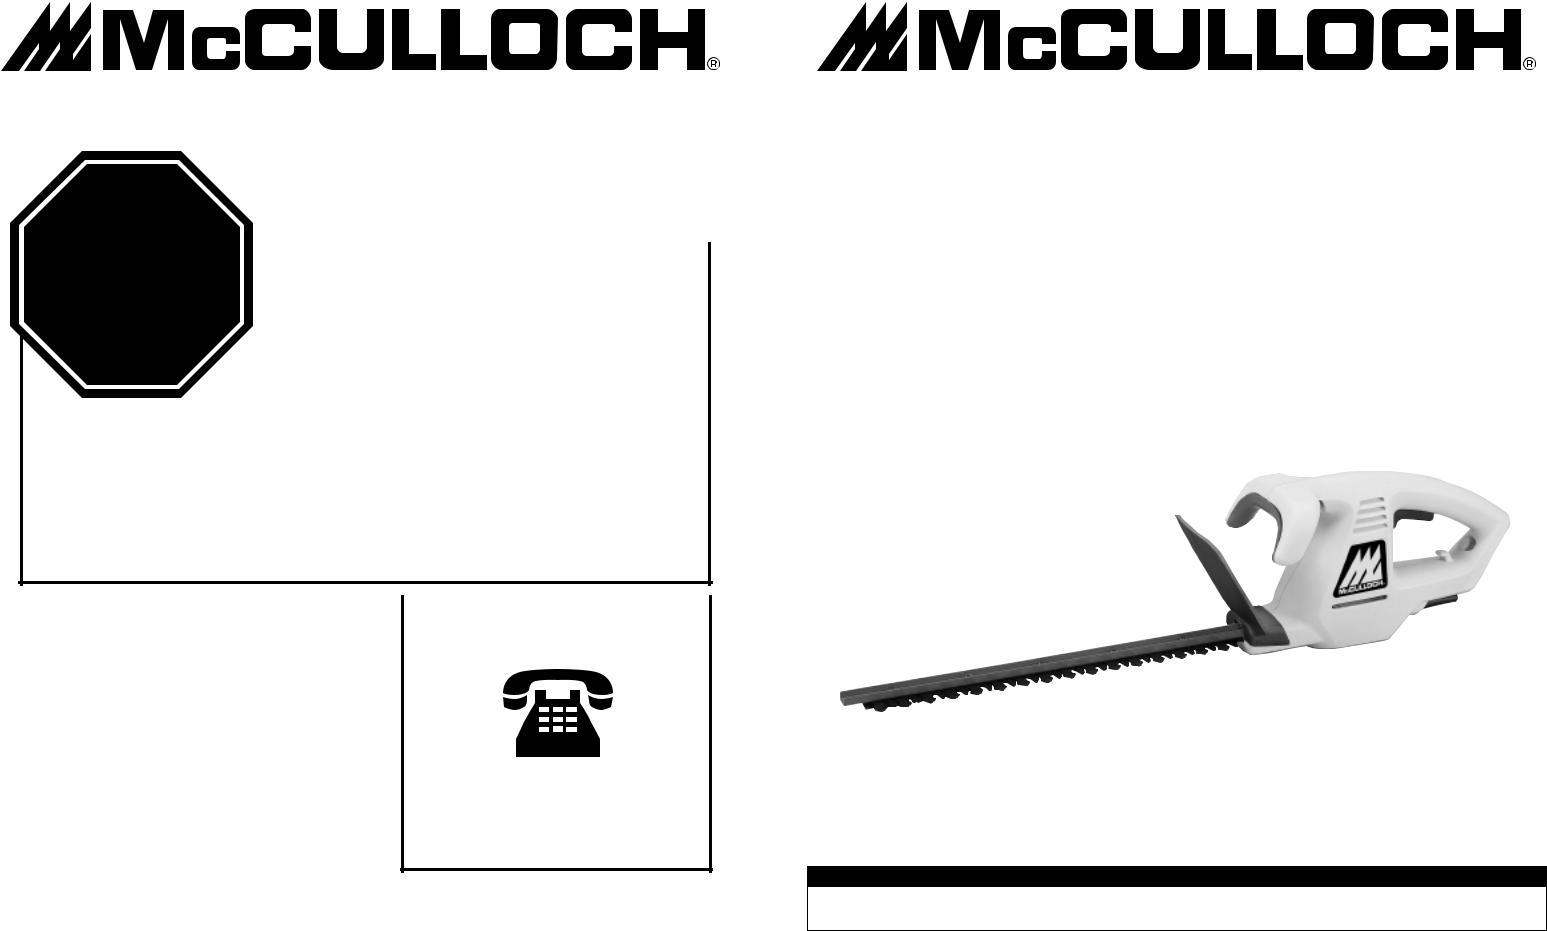 McCulloch MCT203A18, MCT203A20, MCT203A16, MCT203A22 User Manual